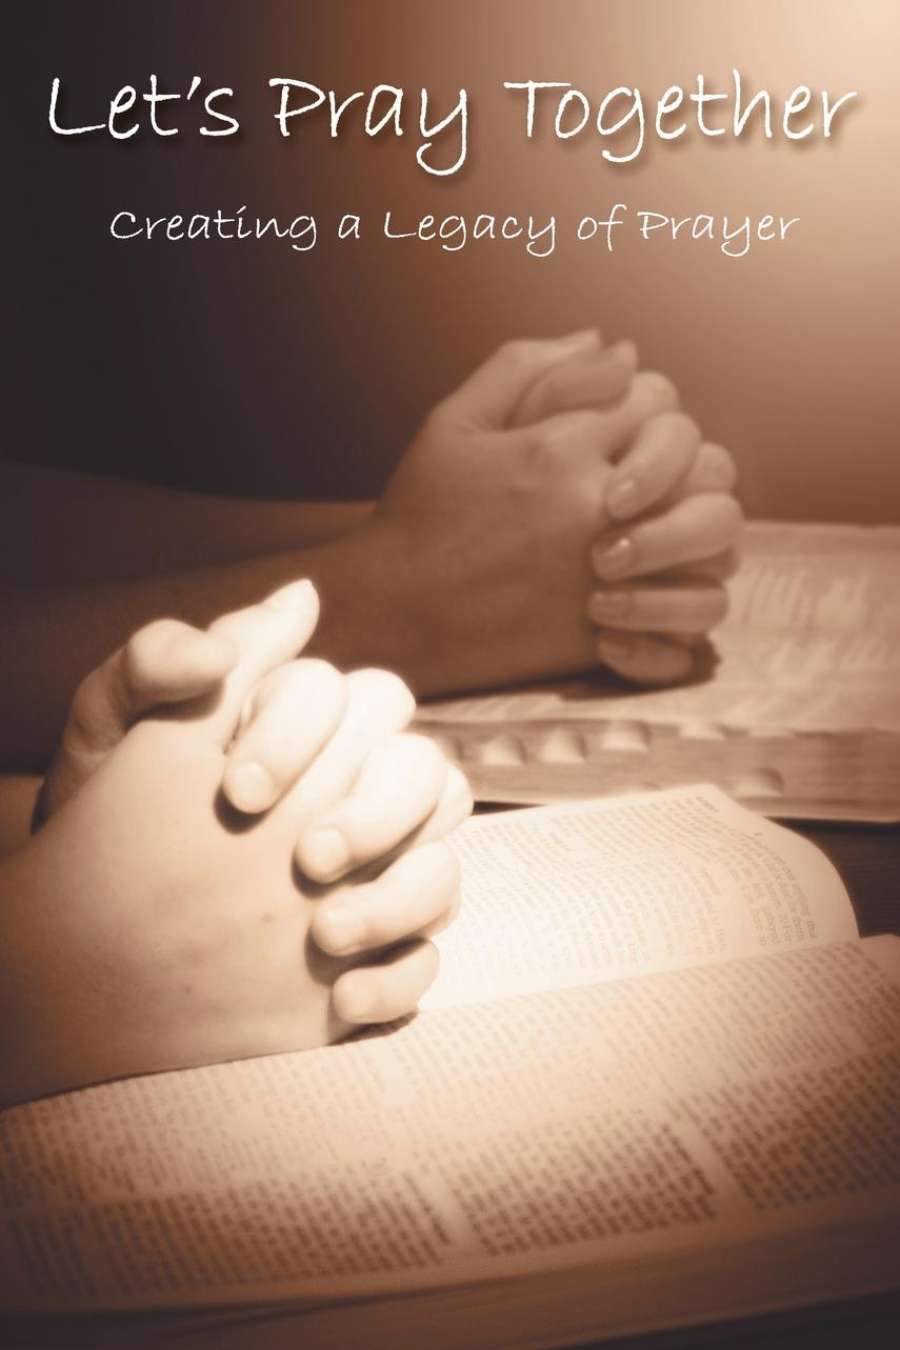 Let's Pray Together - creating a Legacy of Prayer Image